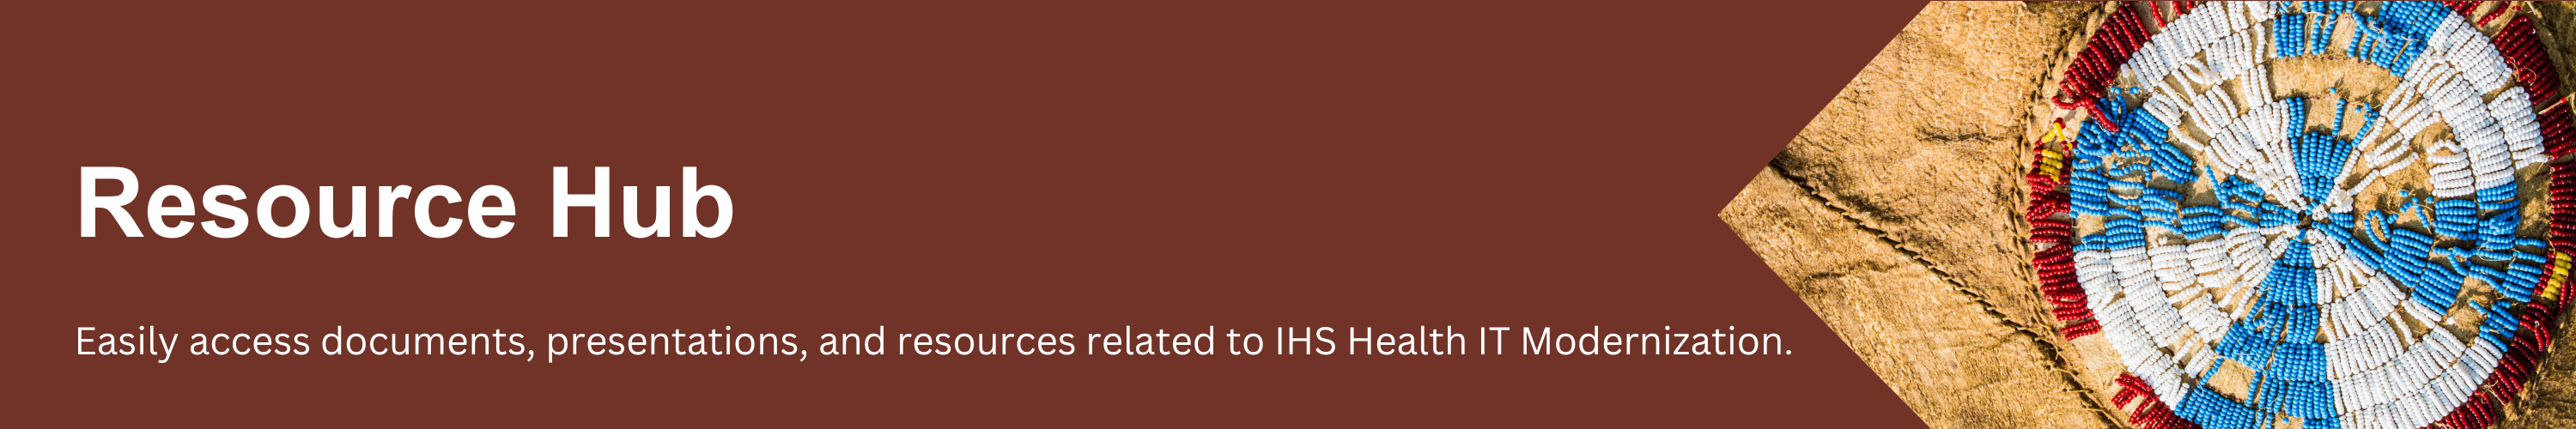 Easily access documents, presentations, and resources related to the IHS Health IT Modernization Program.